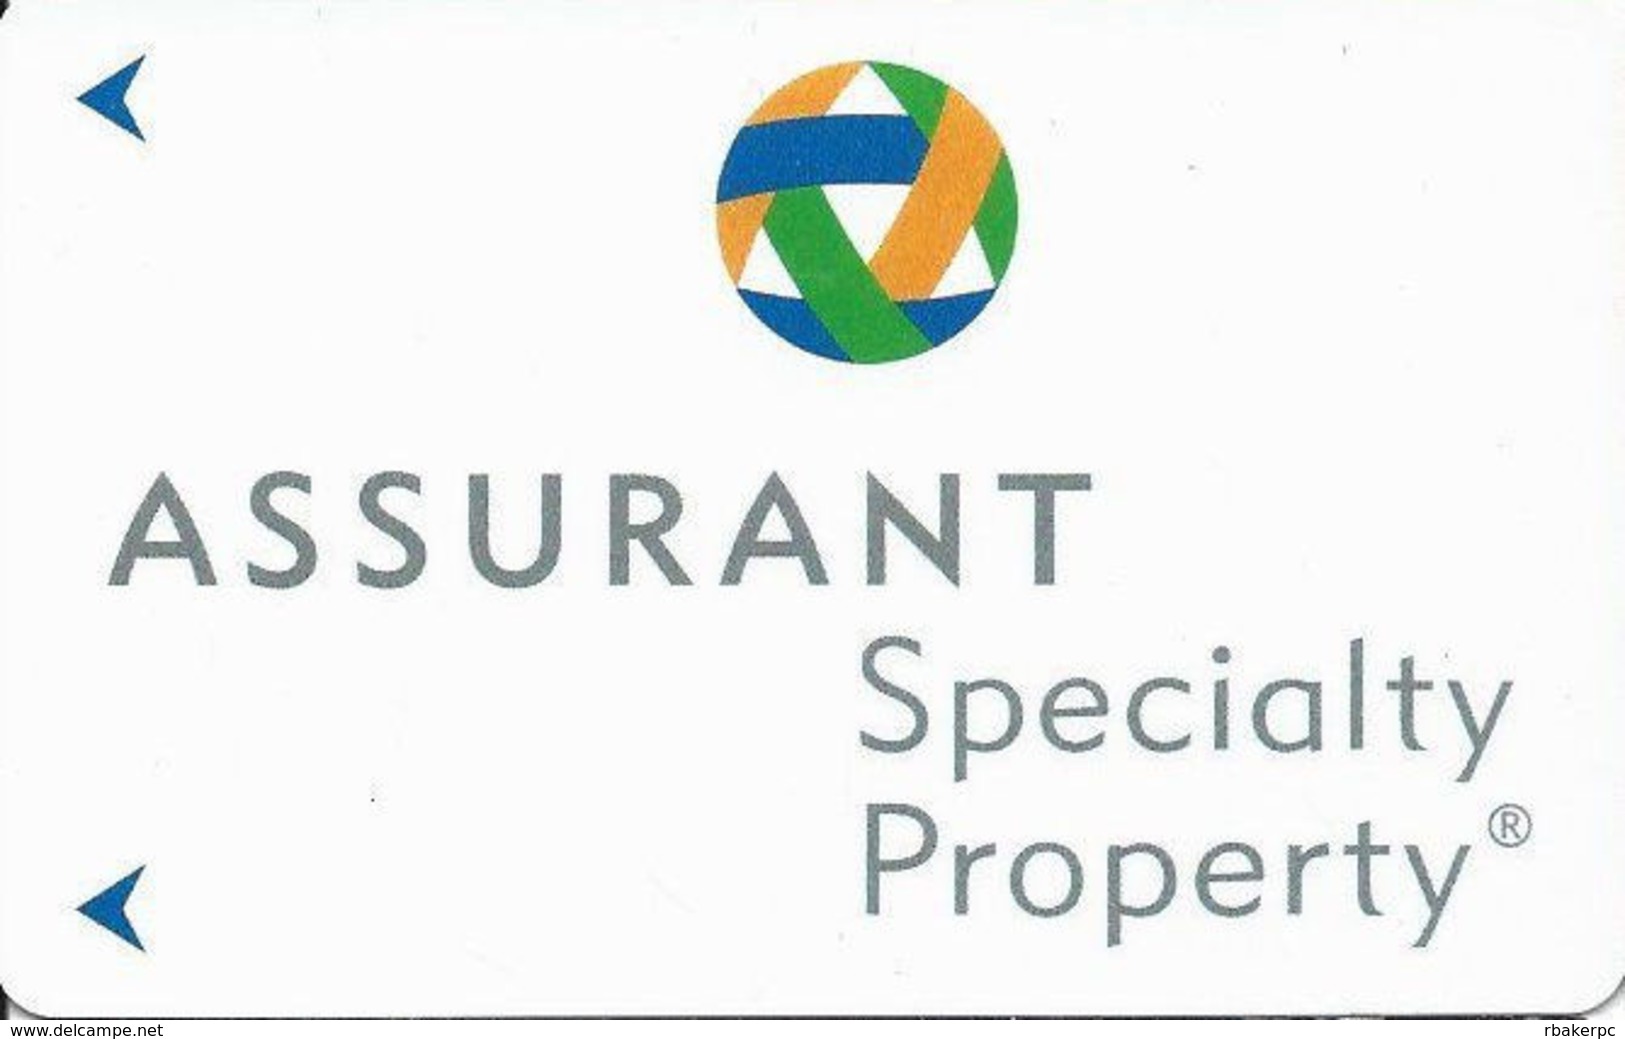 Assurant Specialty Property Advertising Hotel Room Key Card - Hotel Keycards